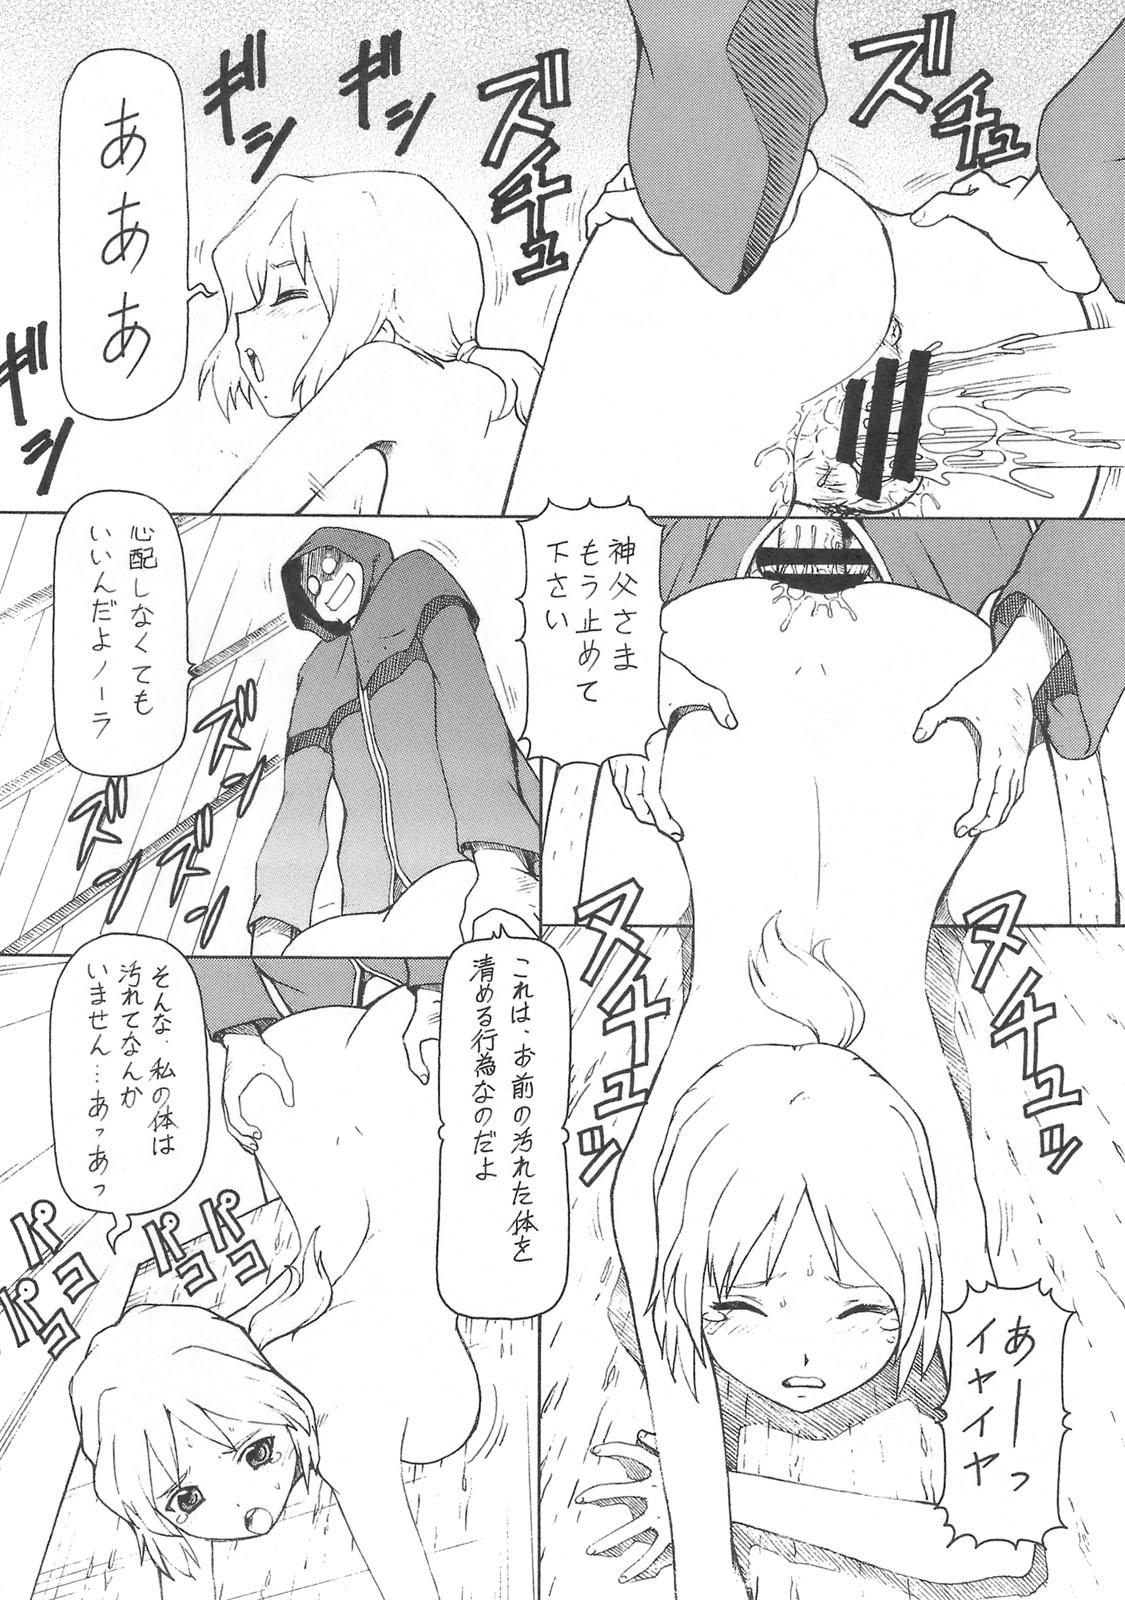 Forbidden Ookami to Butter Inu - Spice and wolf Play - Page 3